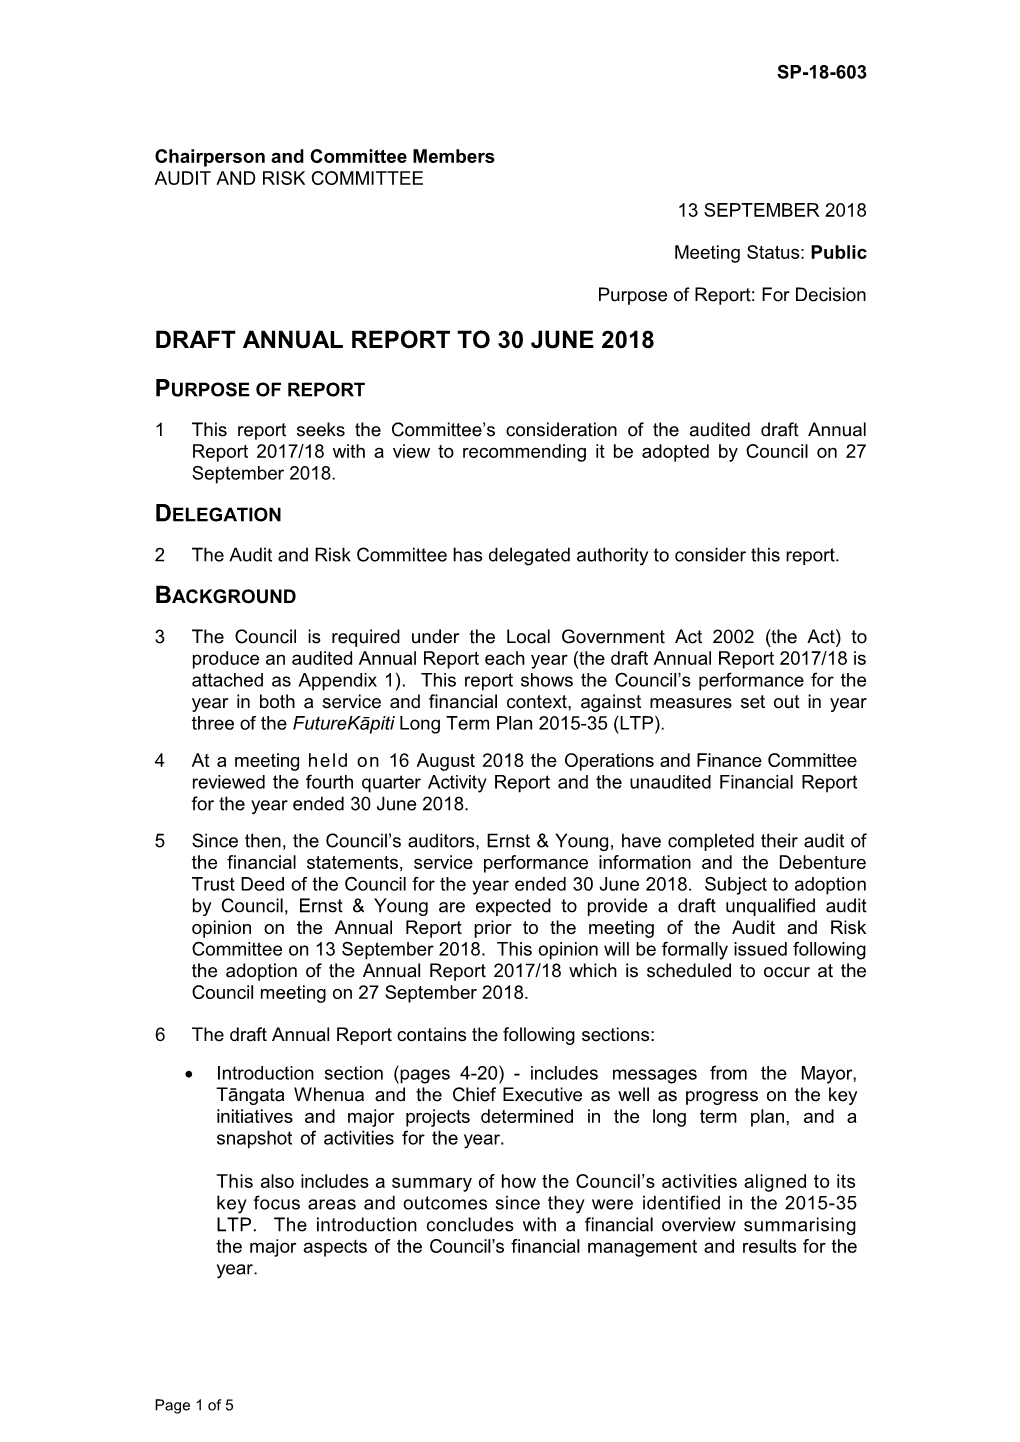 Draft Annual Report to 30 June 2018